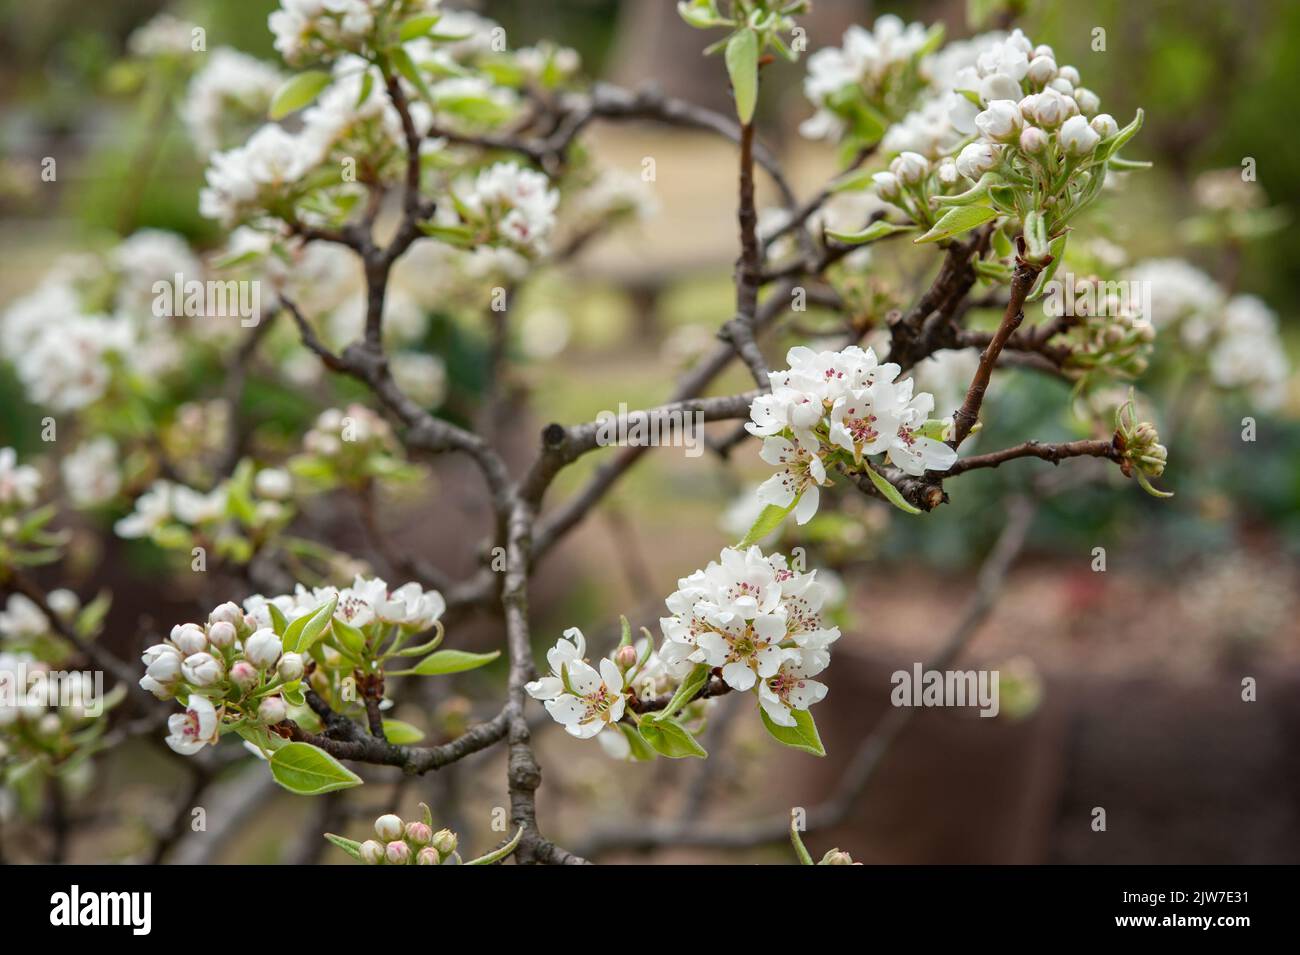 Pyrus communis, the common pear, is a species of pear native to central and eastern Europe, and western Asia.. Stock Photo